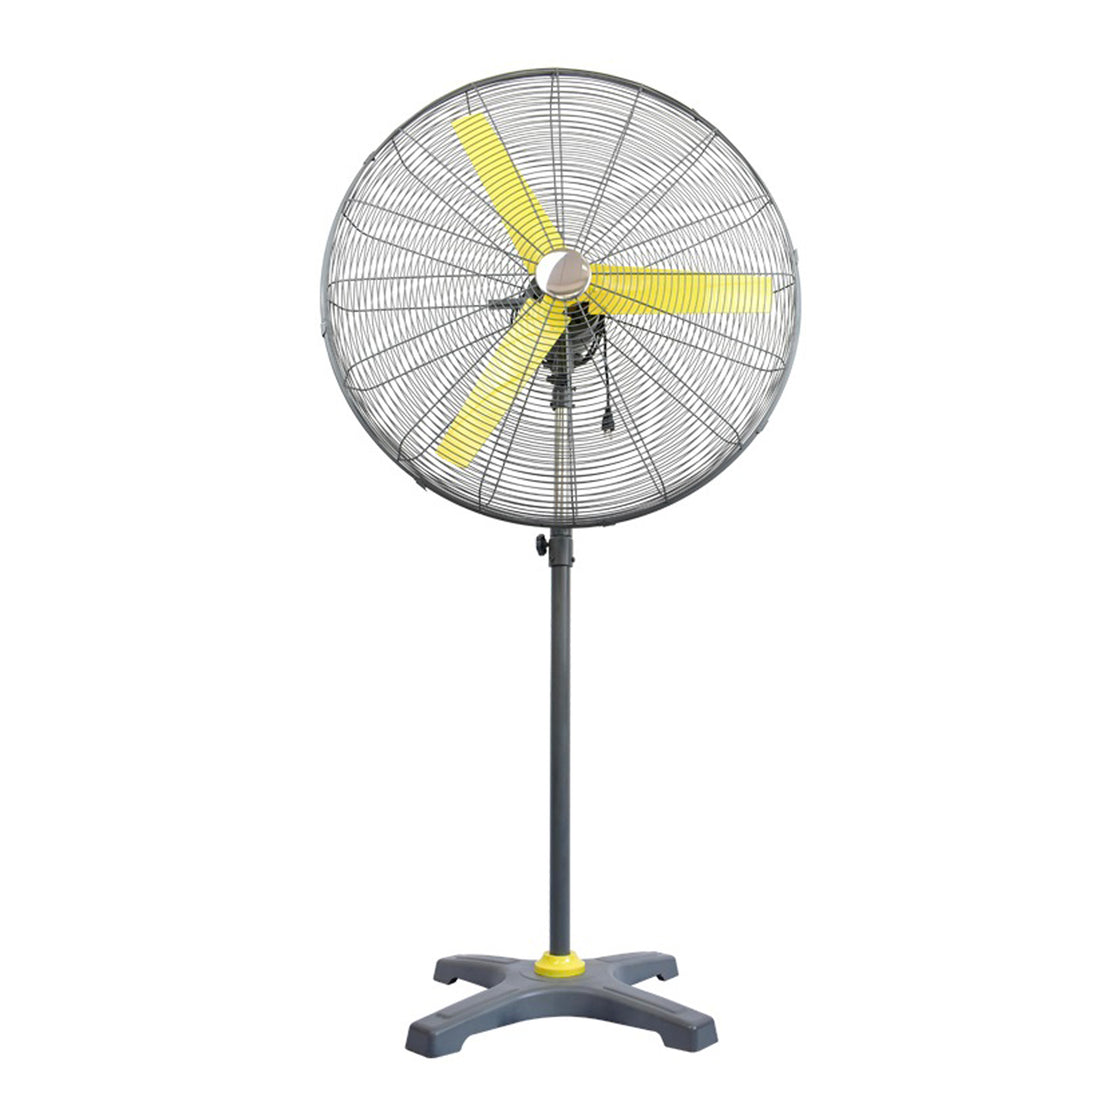 HAVAI BLDC Pedestal Fan 36 inch, 50% Savings on Electricity, High Velocity, Heavy Duty Metal for Industrial, Commercial and Residential Use, Assembly Included